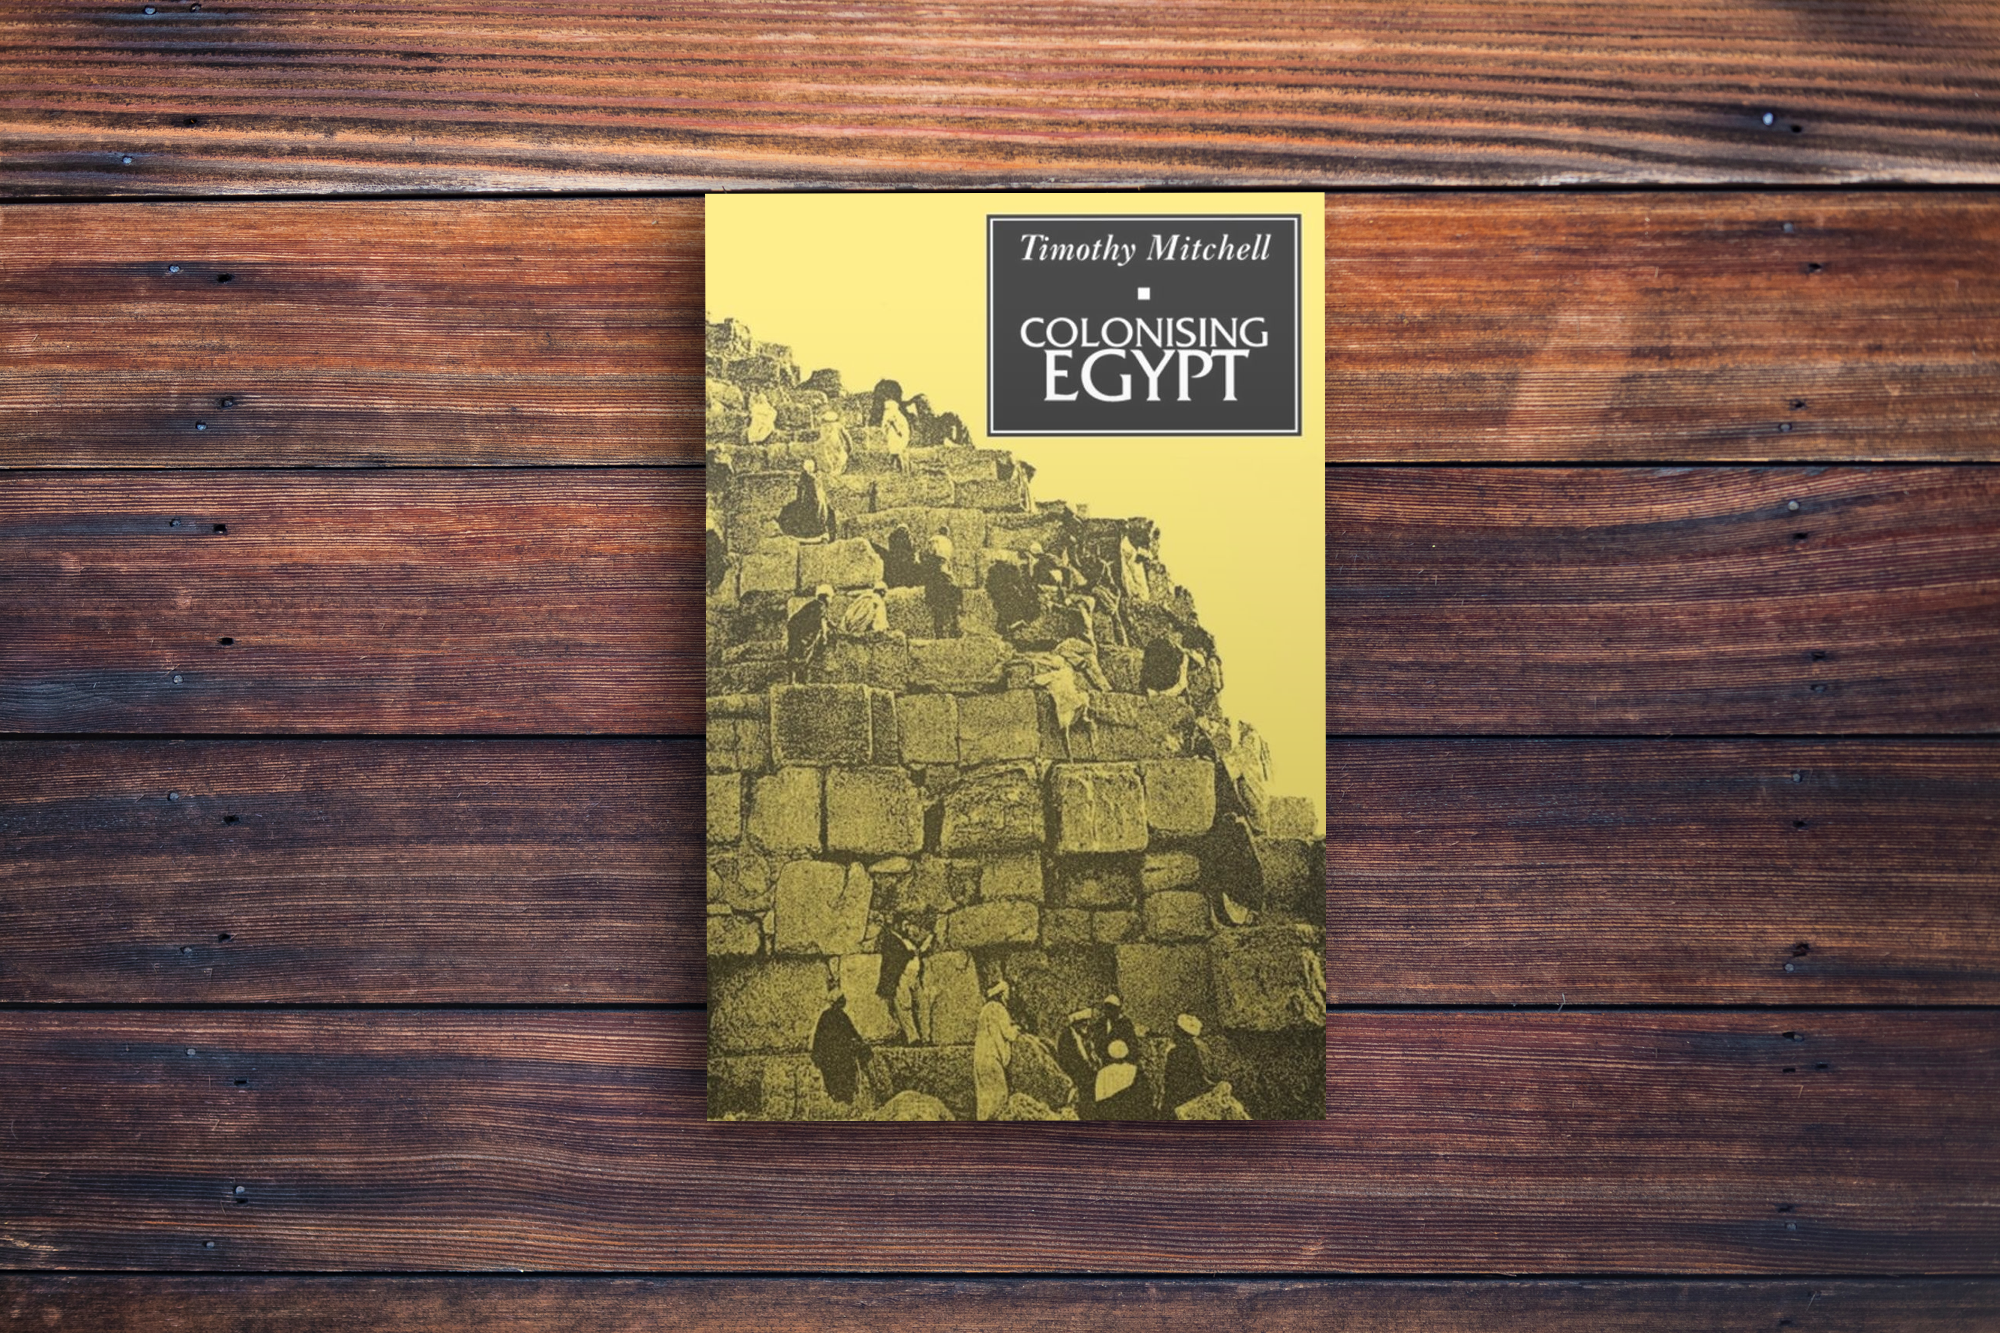 Photo of the book "Colonising Egypt" by Timothy Mitchell. Background by Jon Moore on Unsplash